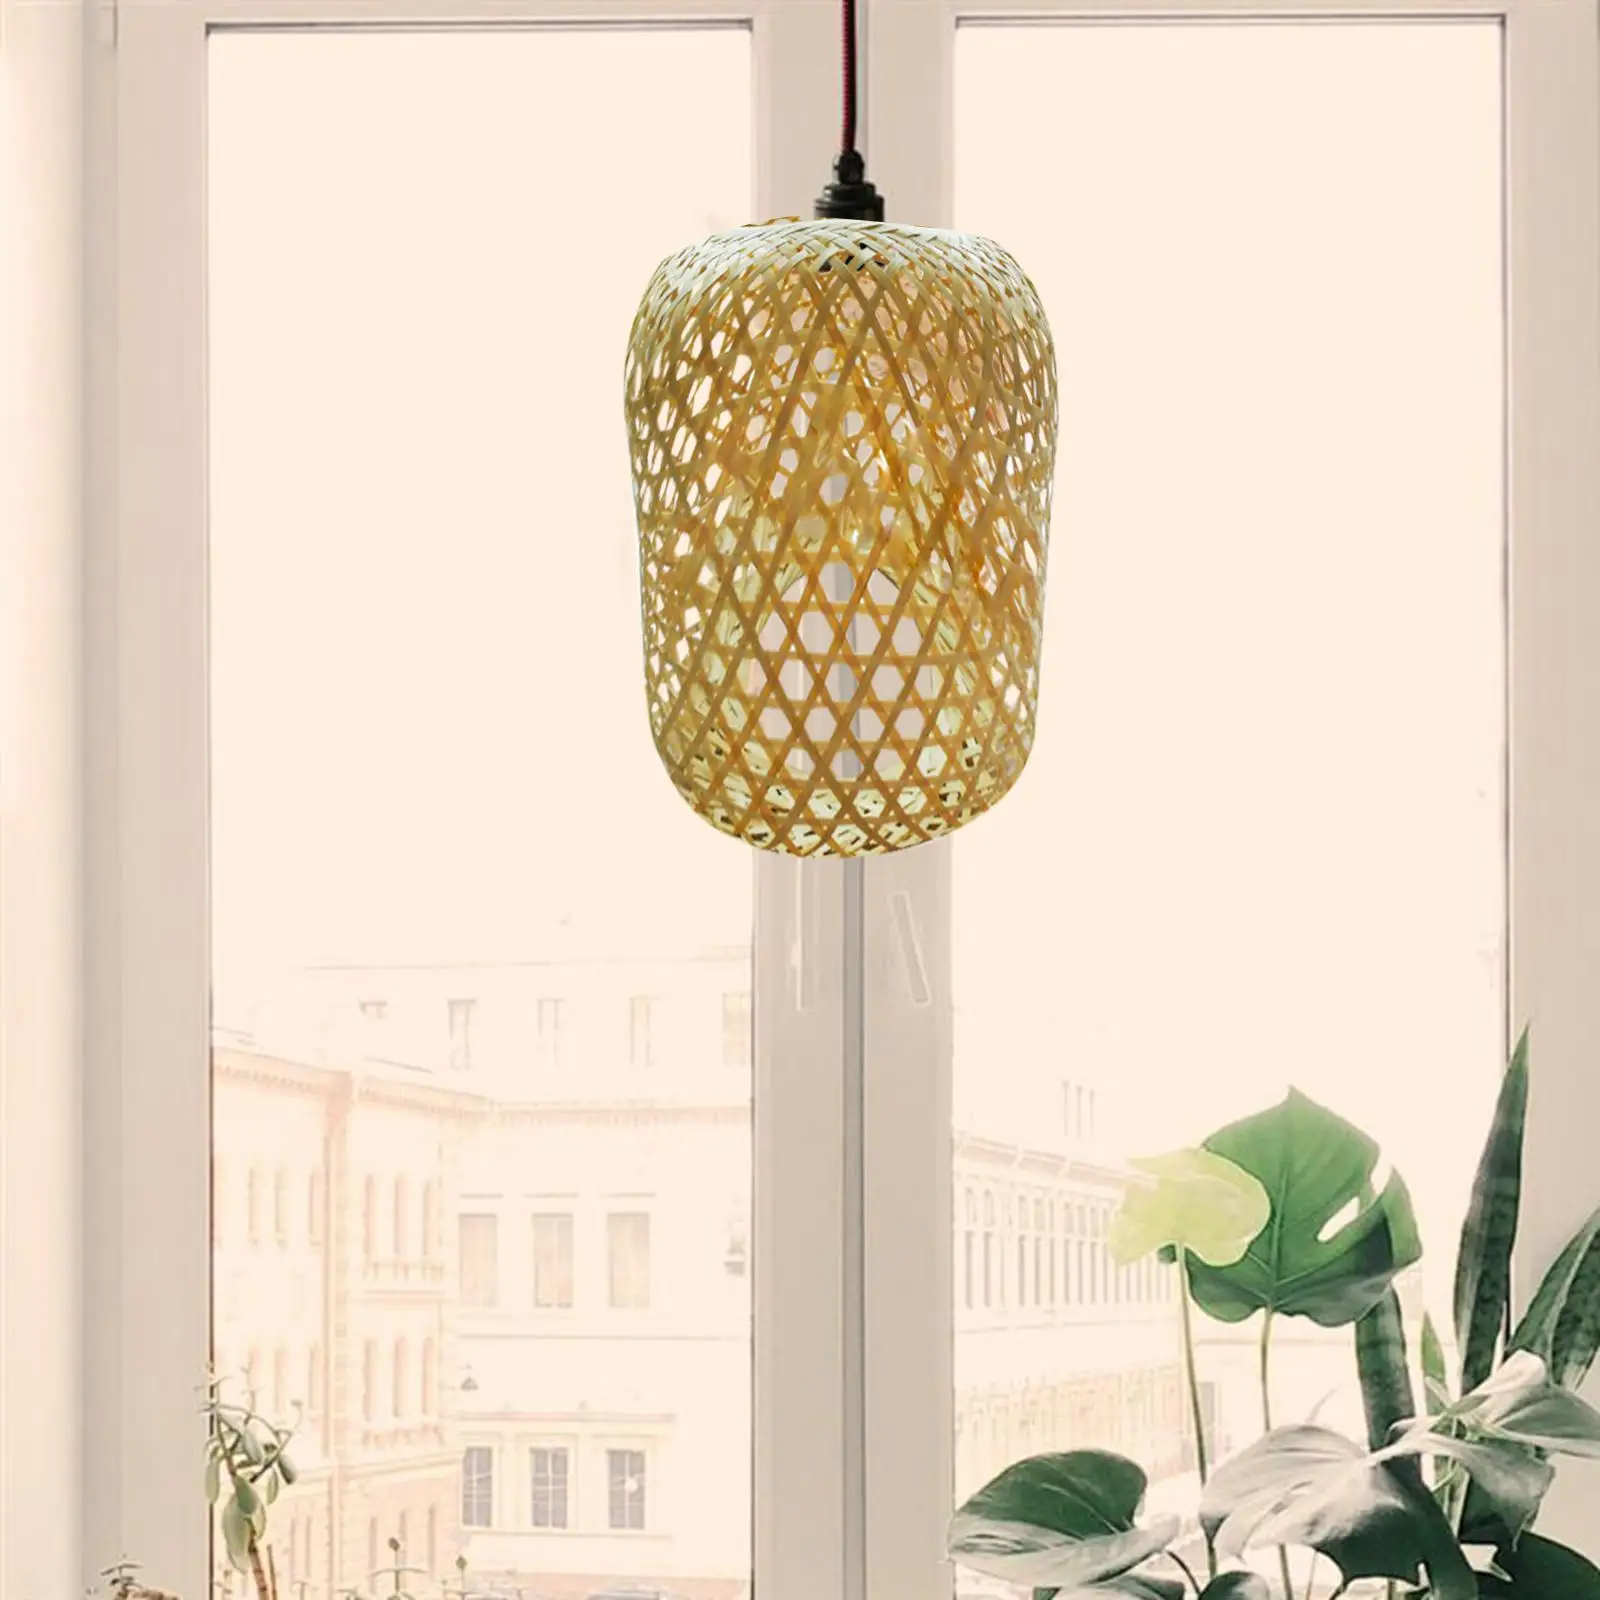 Handmade Weaving Lamp Shade Ornament Lampshade for Dining Room Hotel Kitchen Decor